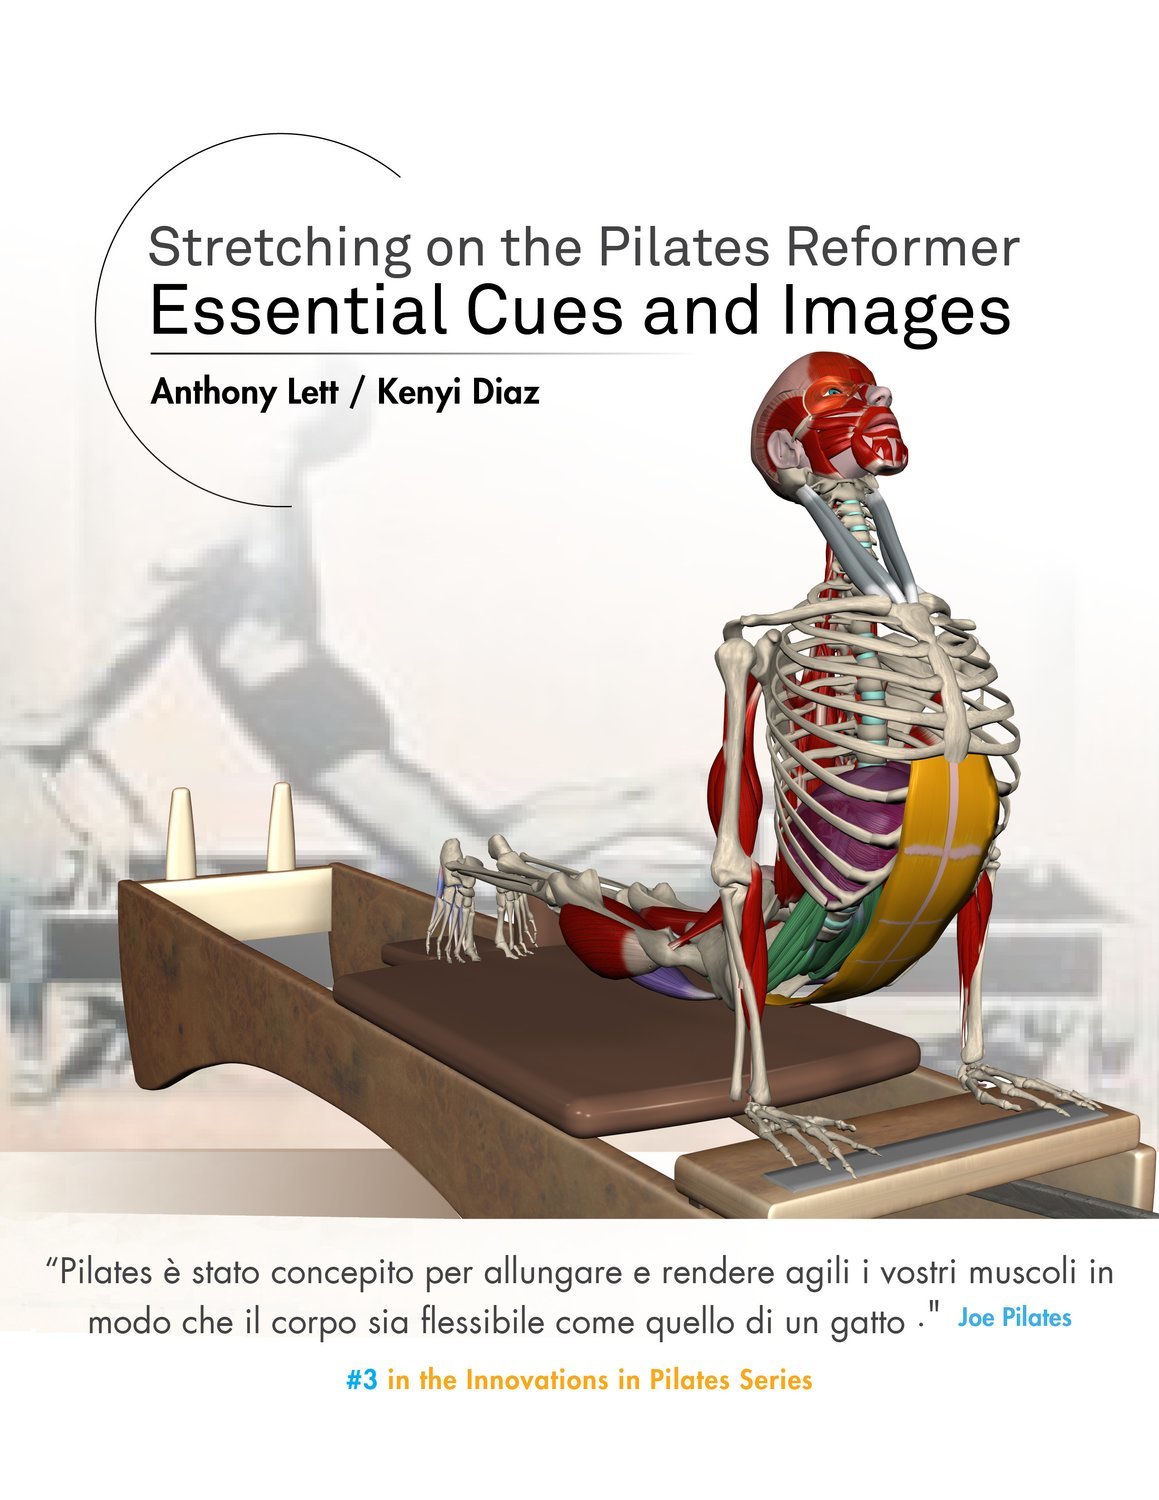 Stretching on the Pilates Reformer: Essential Cues and Images Italian Version (Print)